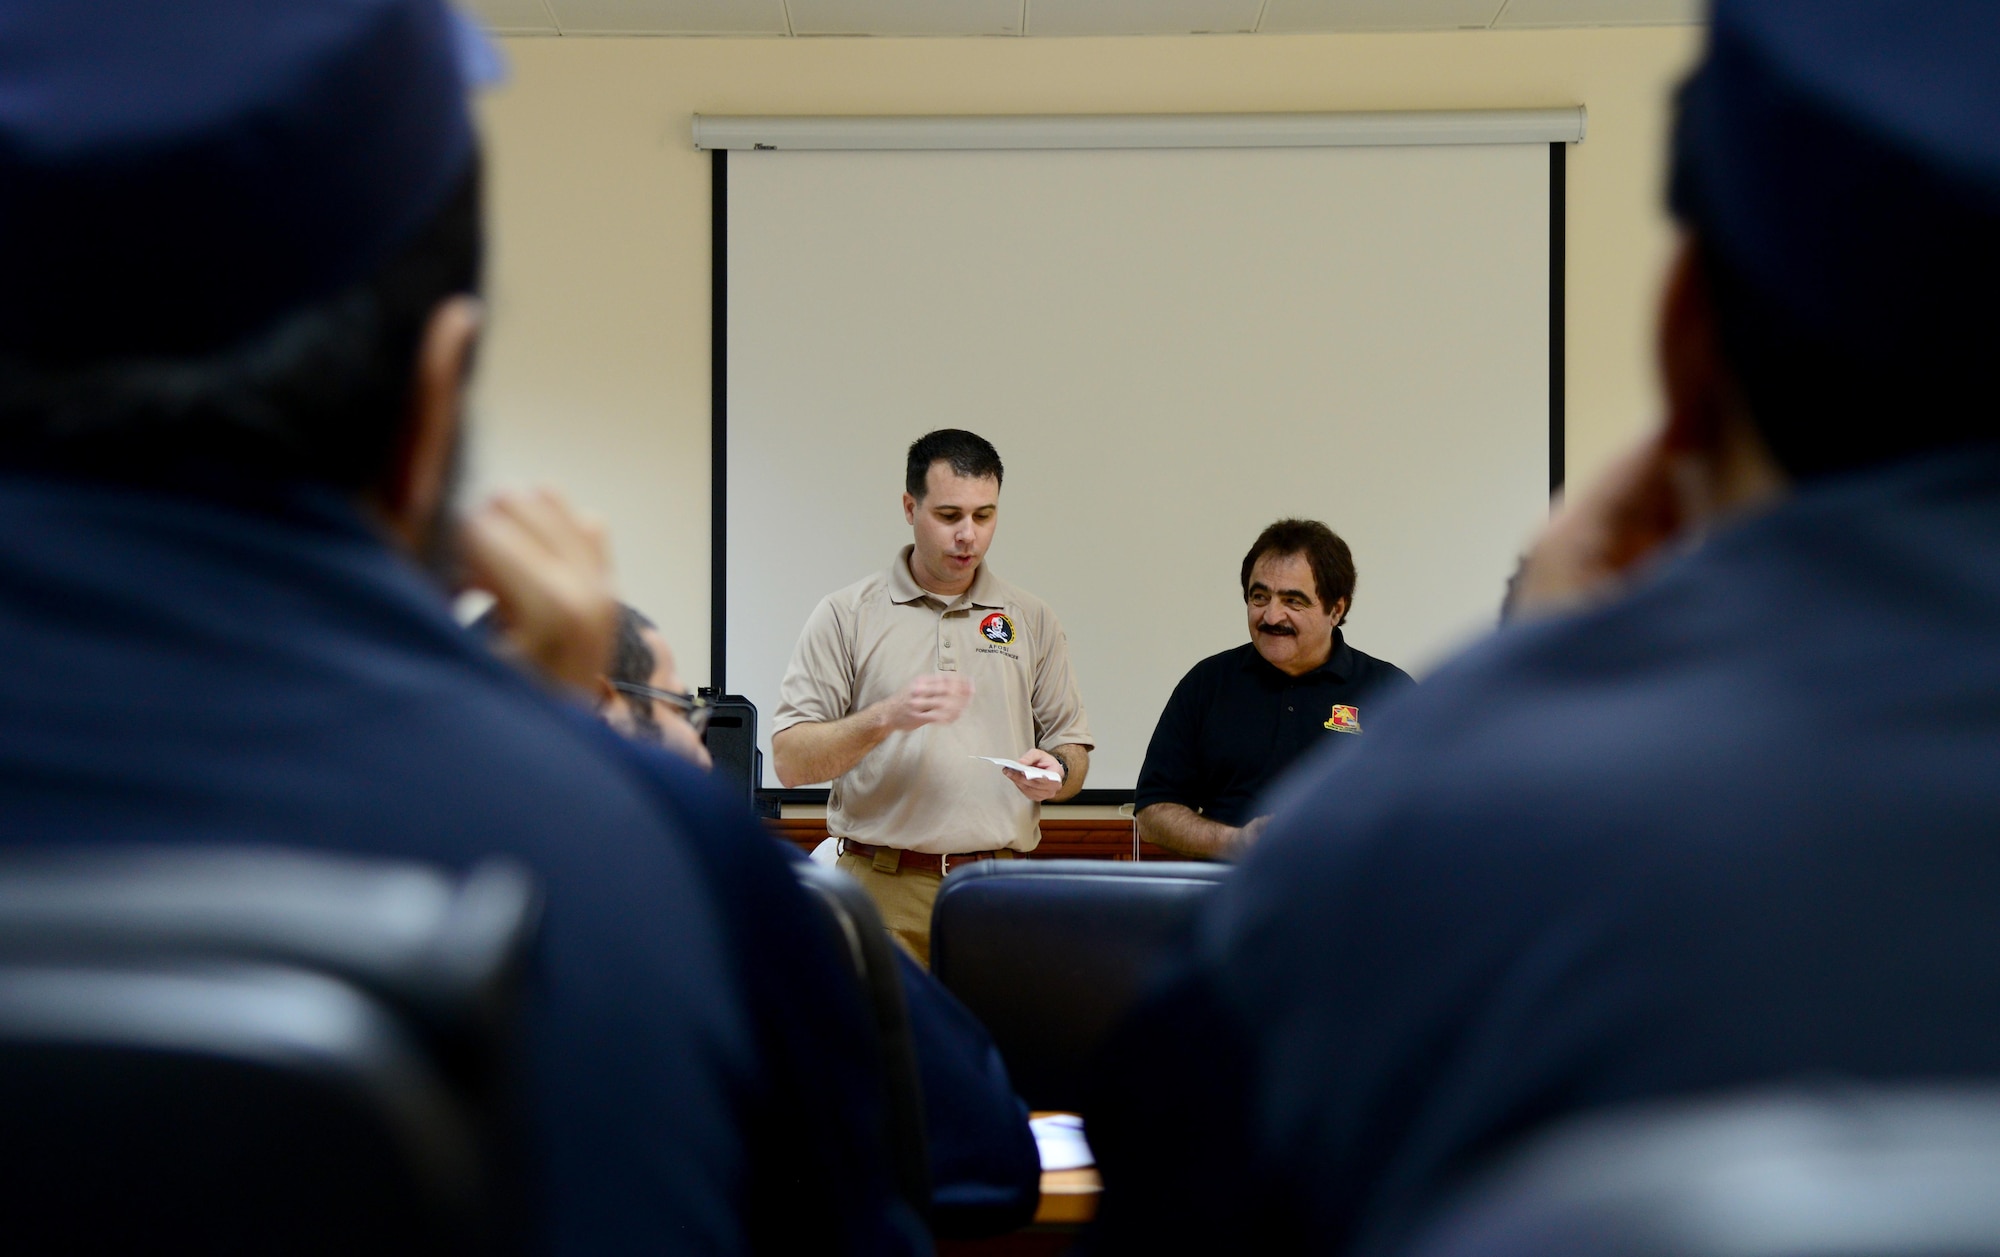 U.S. Special Agent Chad Hutchins, center, Forensics Science Consultant from the Federal Law Enforcement Training Center in Brunswick, Ga., discusses fingerprinting techniques with members of the Qatar Ministry of Interior’s Crime Scene Processing Unit during a liaison exchange, March 3, 2015, at the Criminal Evidence and Information Department, Ar-Rayyan, Qatar. During the liaison exchange, members from Air Force Office of Special Investigations Detachment 241 and their Qatari counterparts shared different forensic methods they use when investigating a crime scene. (U.S. Air Force photo by Senior Airman Kia Atkins)
